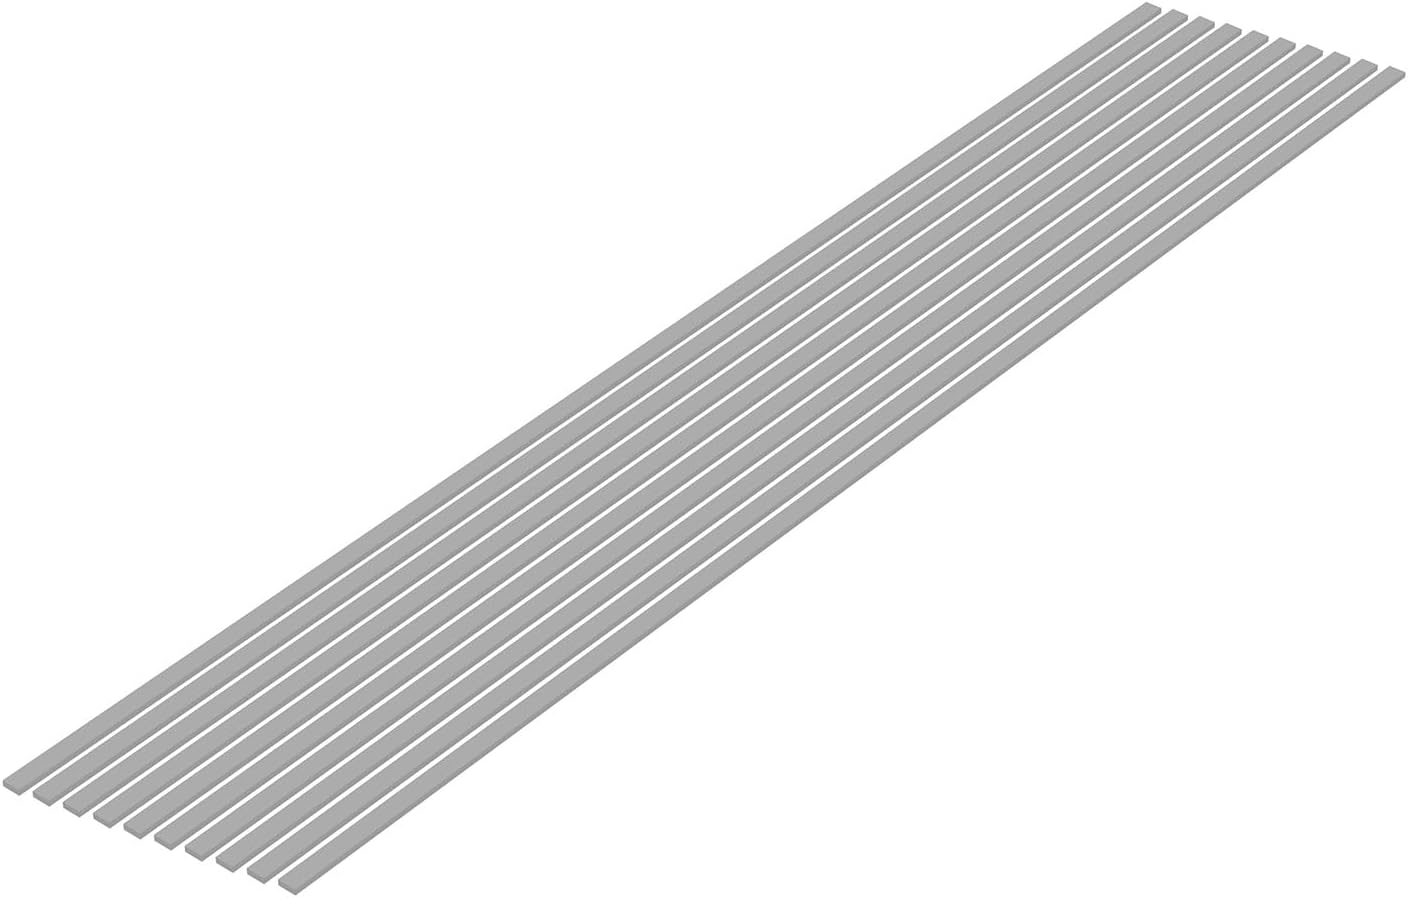 Wave Material Series OM-483 Plastic Material Gray Shredded Board 0.04 x 0.12 inches (1.0 x 3.0 mm), 10 Pieces - BanzaiHobby